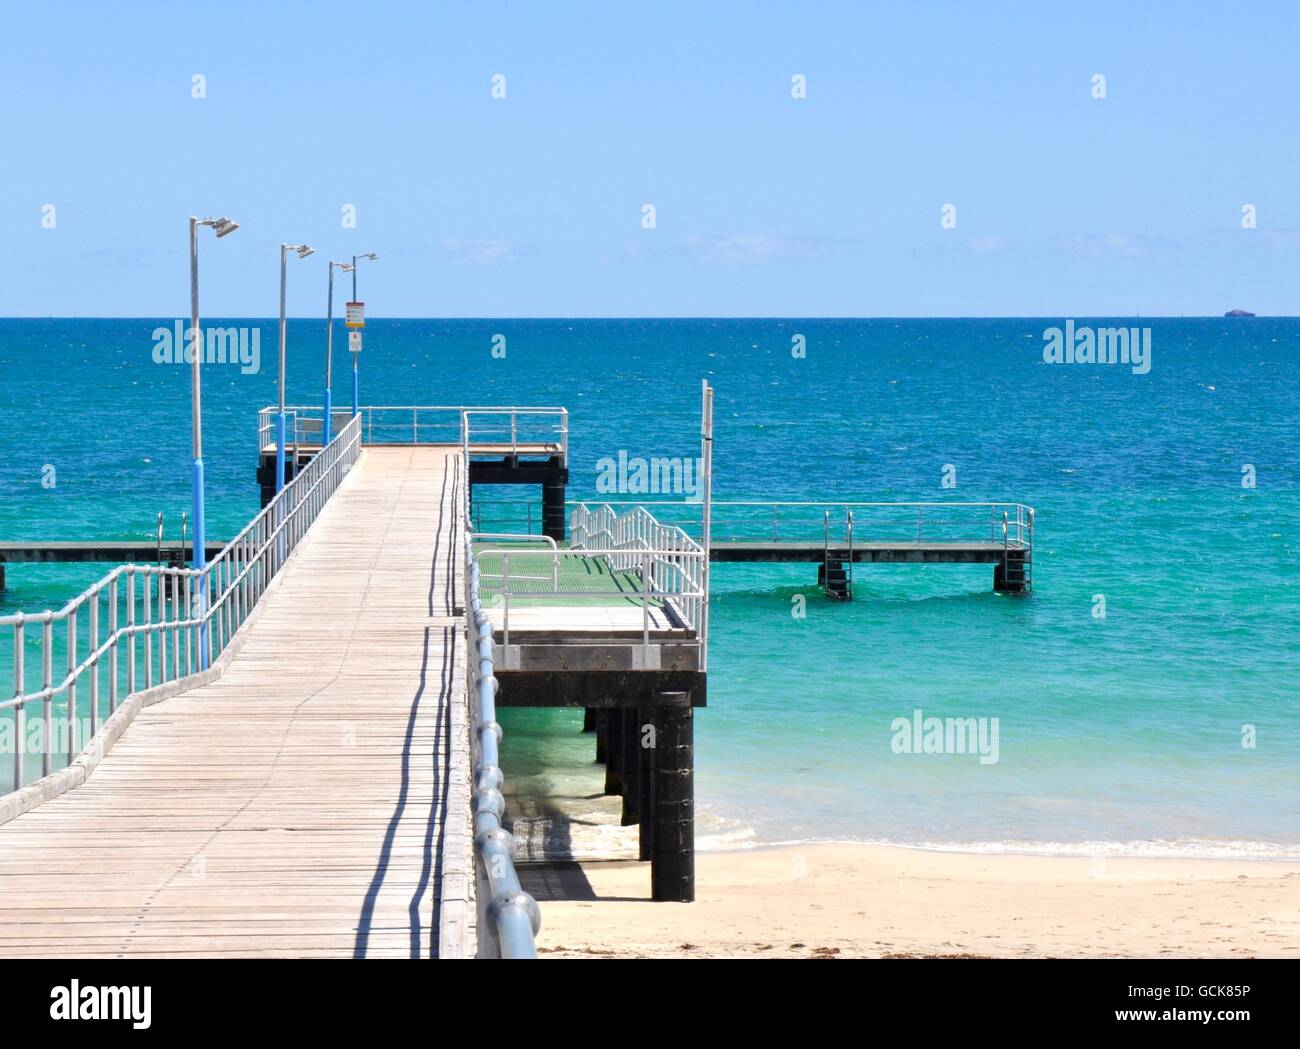 The Coogee Beach jetty structure with the turquoise-green Indian Ocean seasccape under a blue sky in Coogee, Western Australia. Stock Photo